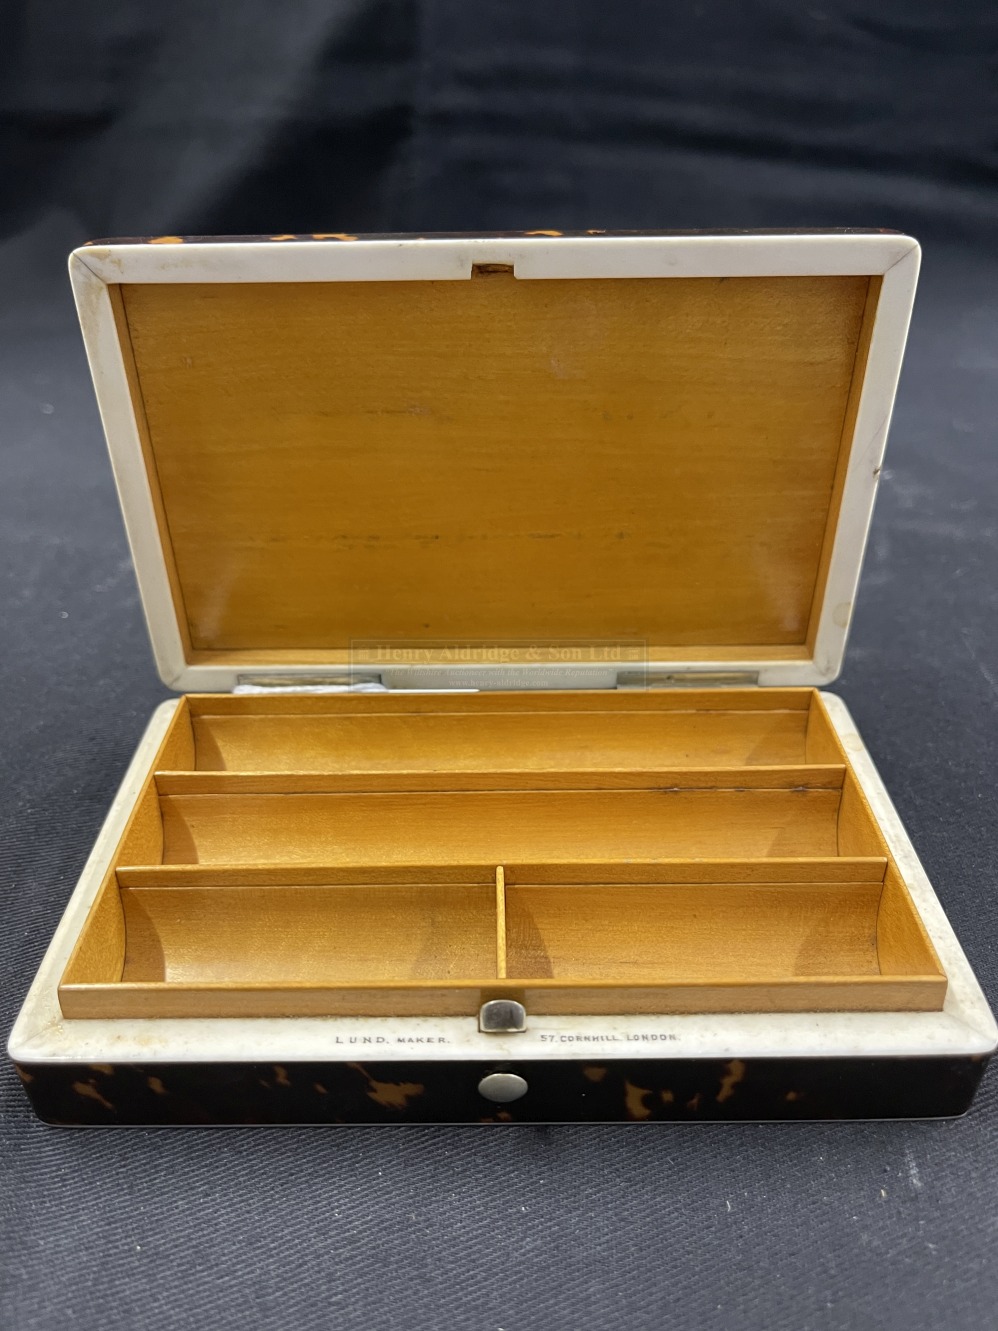 19th cent. Tortoiseshell box with satinwood interior, maker Lund of Cornhill St. London. 5½ins. x - Image 2 of 2